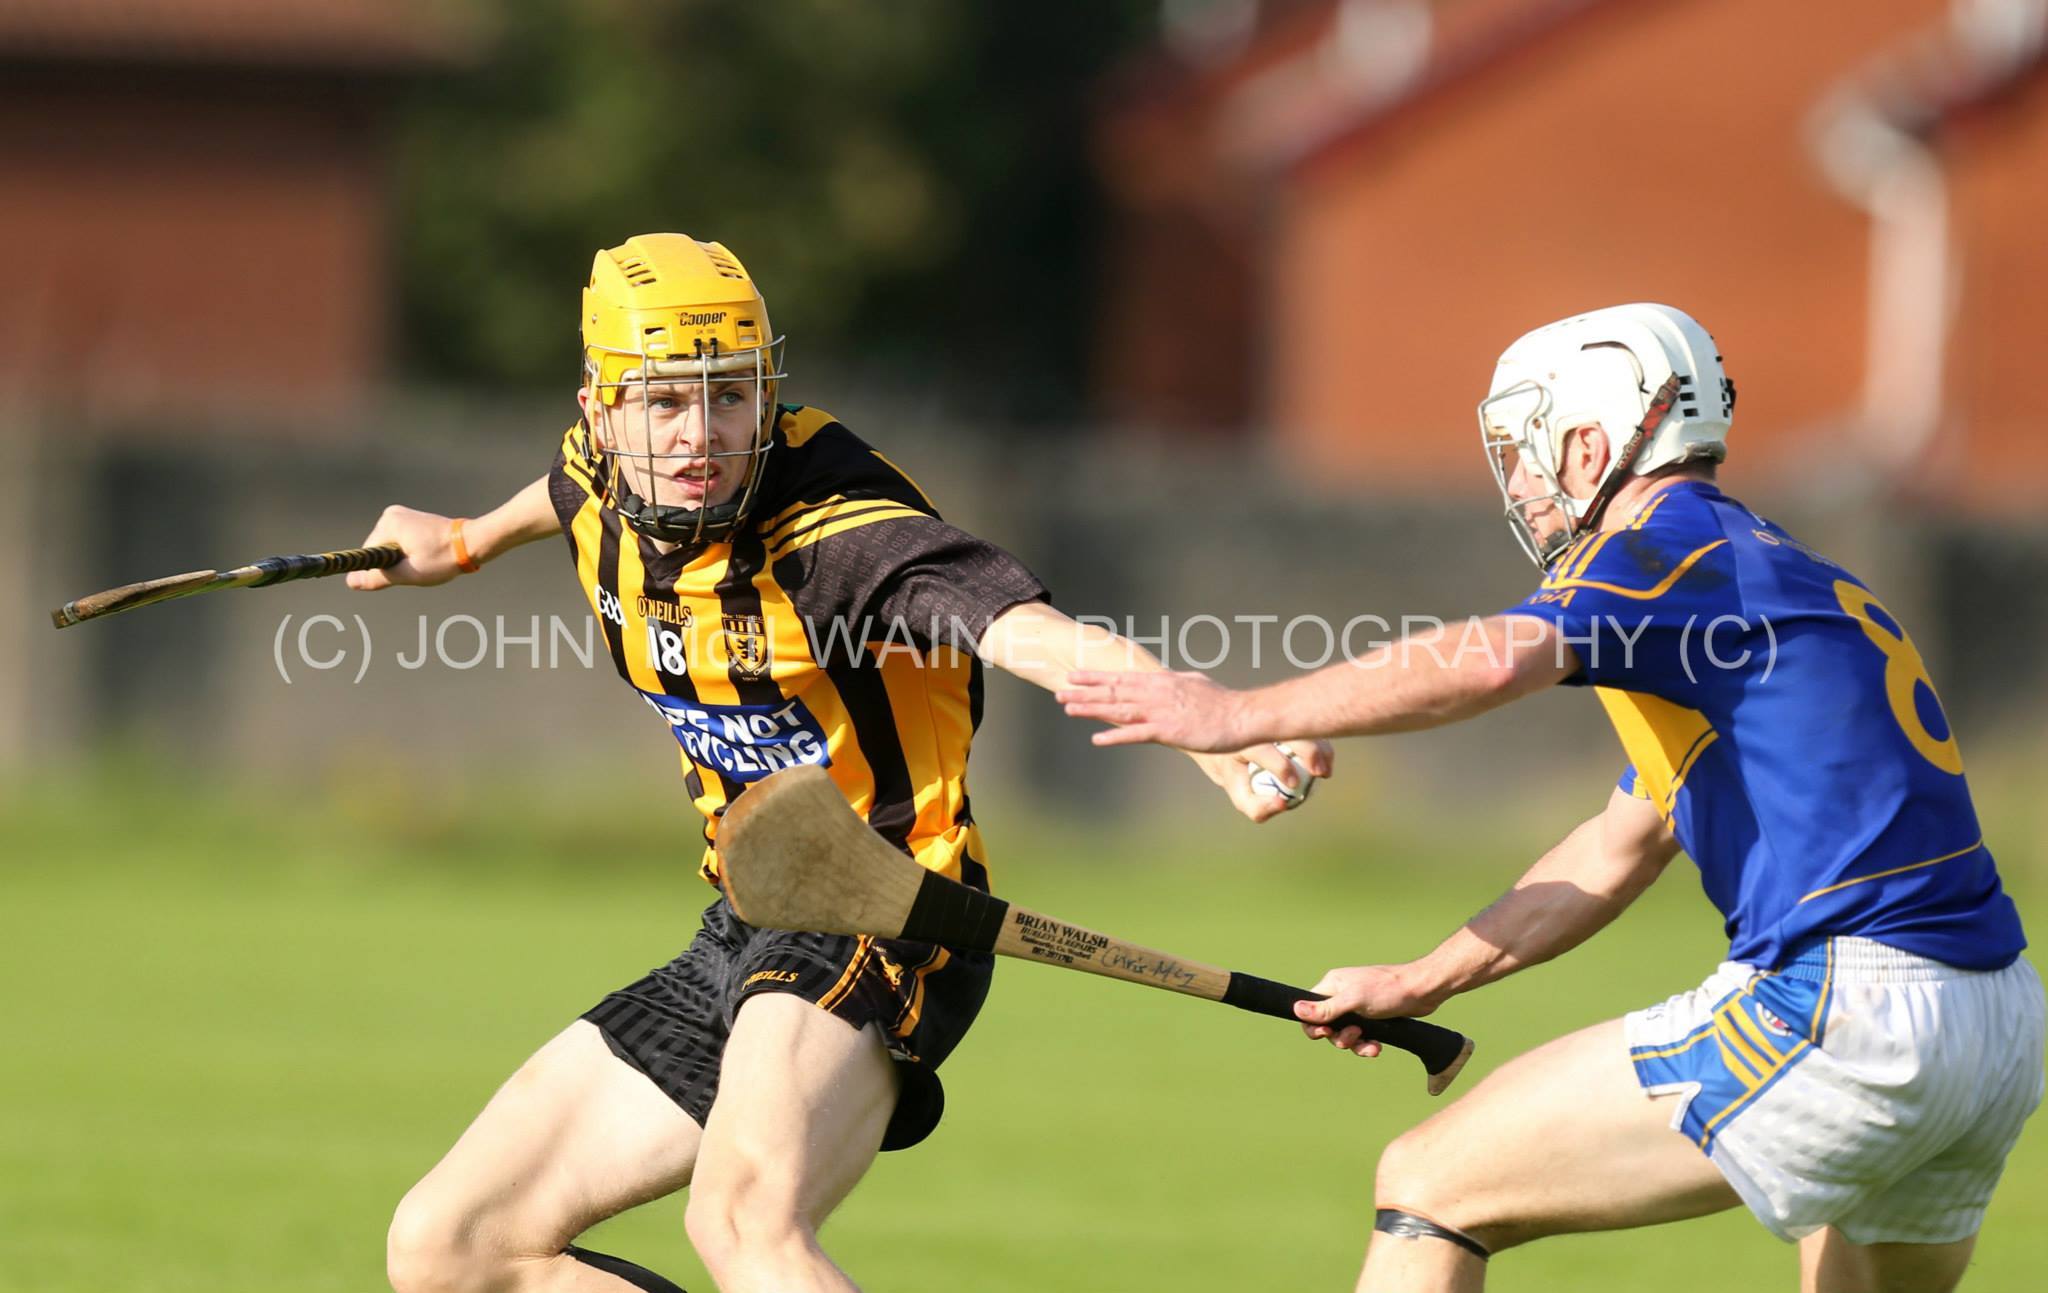 Championship dates and venues confirmed for SHC and MHC